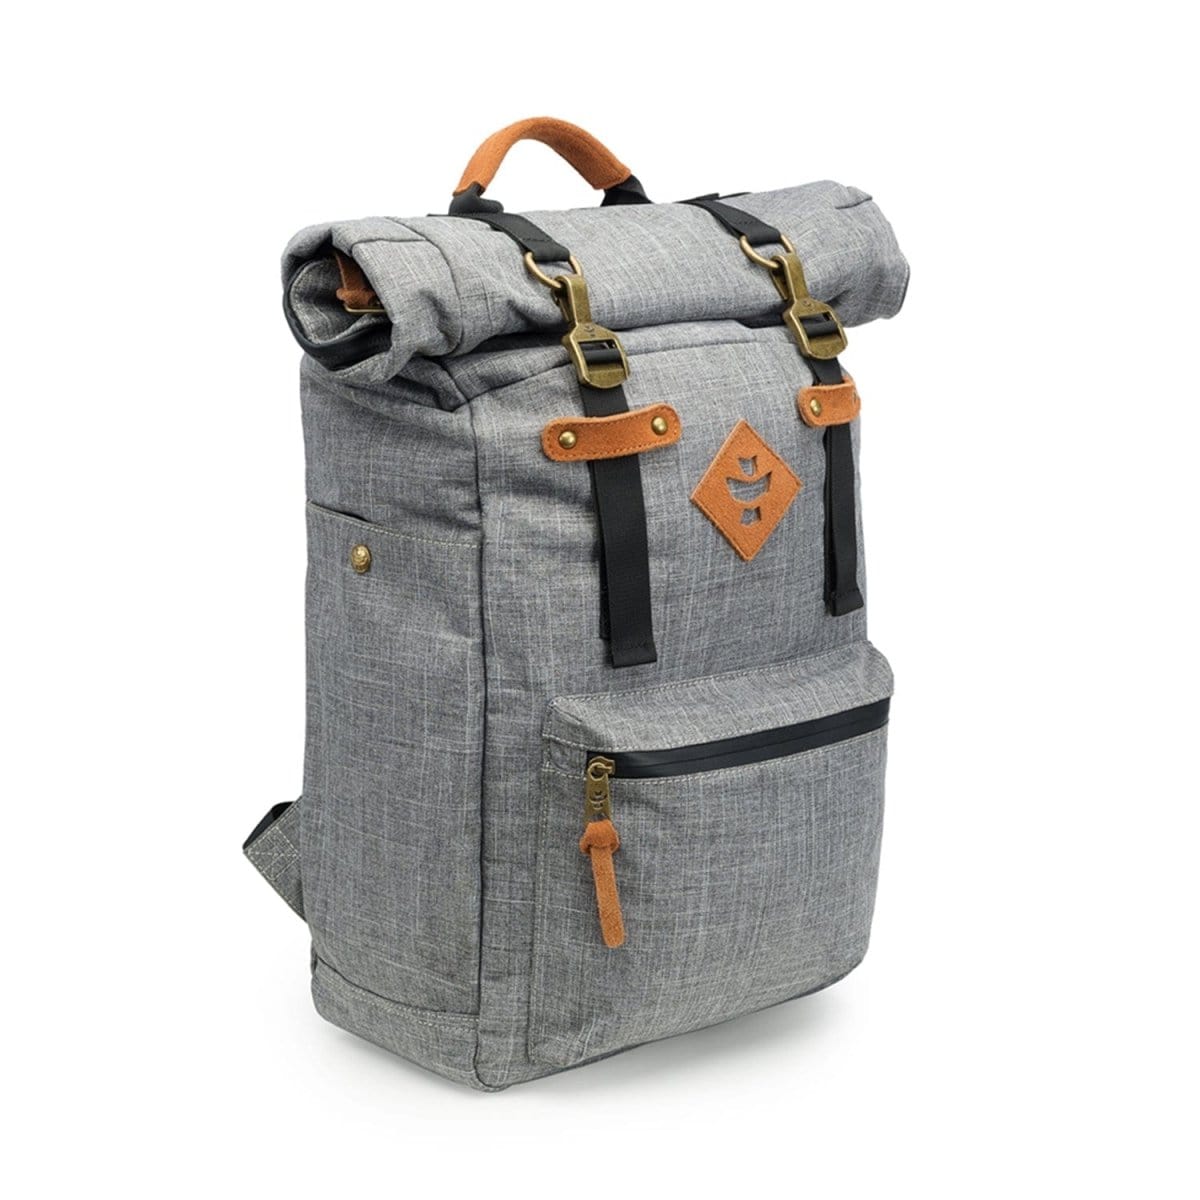 Revelry Supply Travel Bag Crosshatch Grey The Drifter - Smell Proof Rolltop Backpack